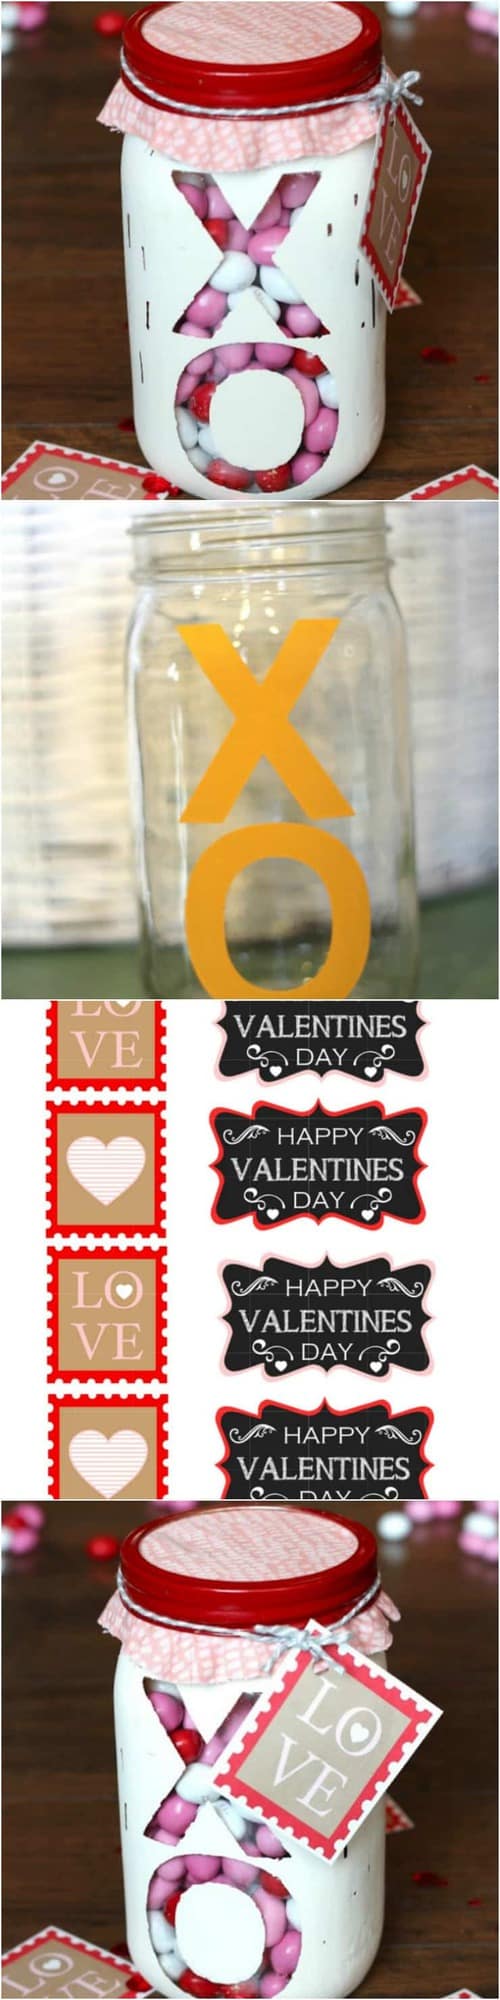 How to make a Valentine's Day Mason Jar filled with candy